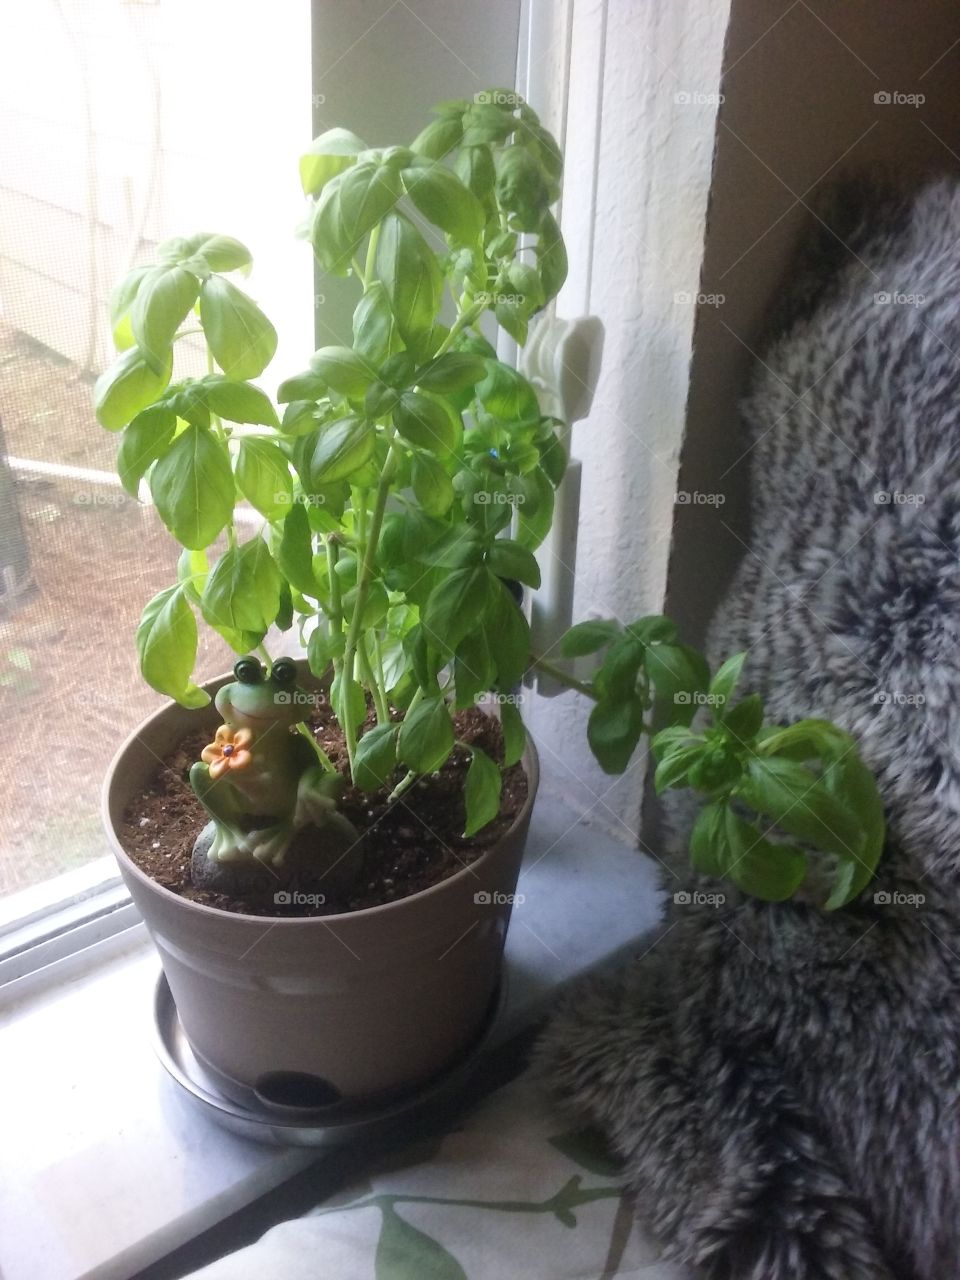 Basil ,it's the house plant !